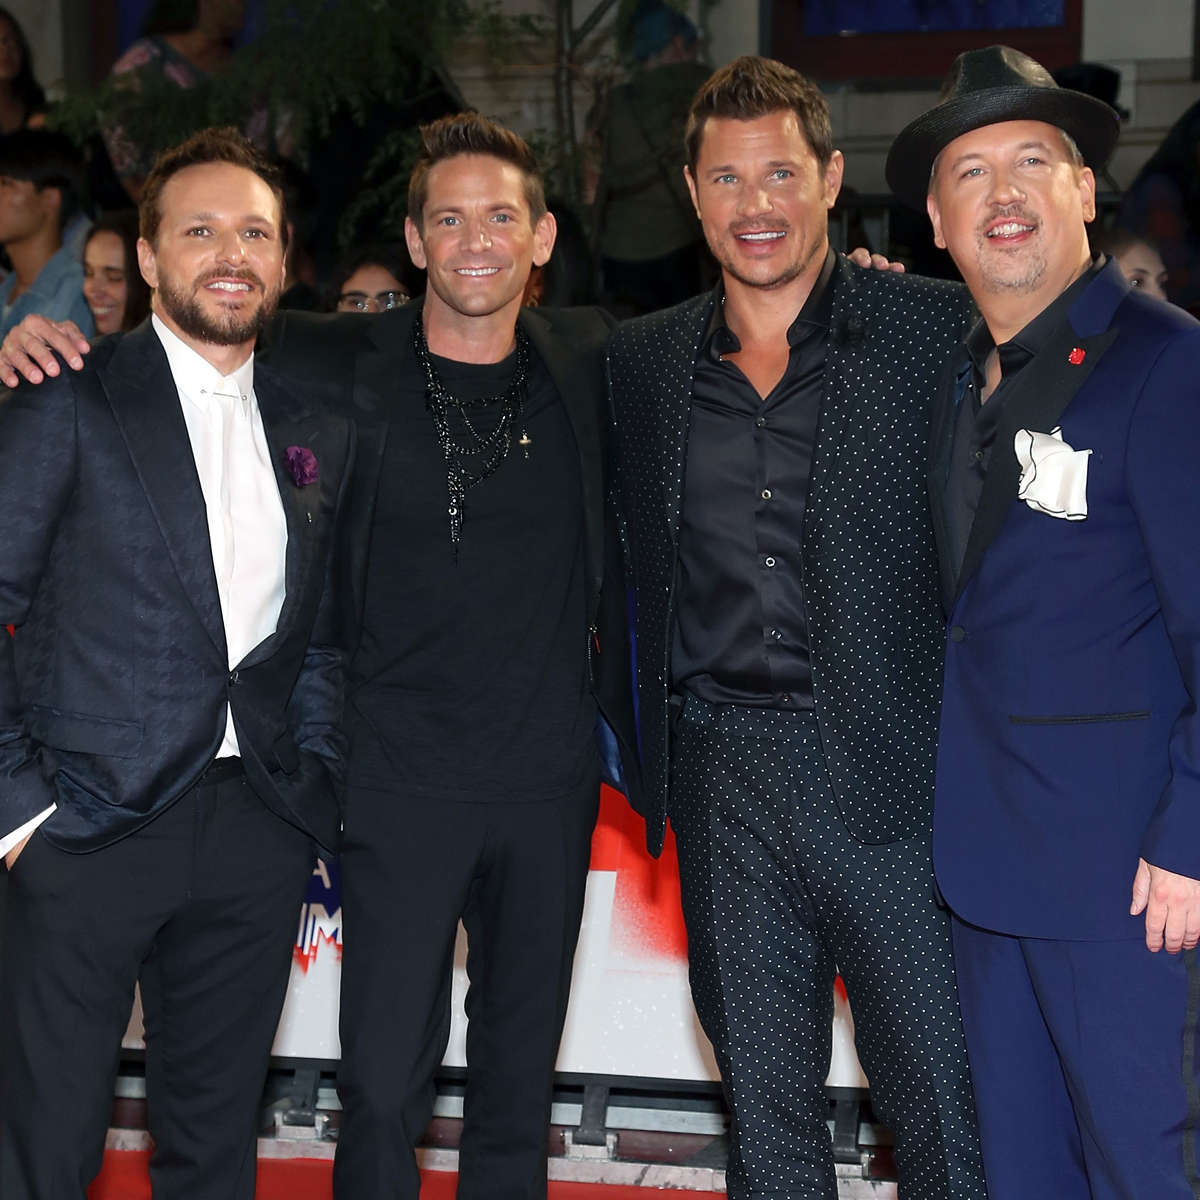 Nick Lachey and Justin Jeffre of 98 Degrees appear on Global